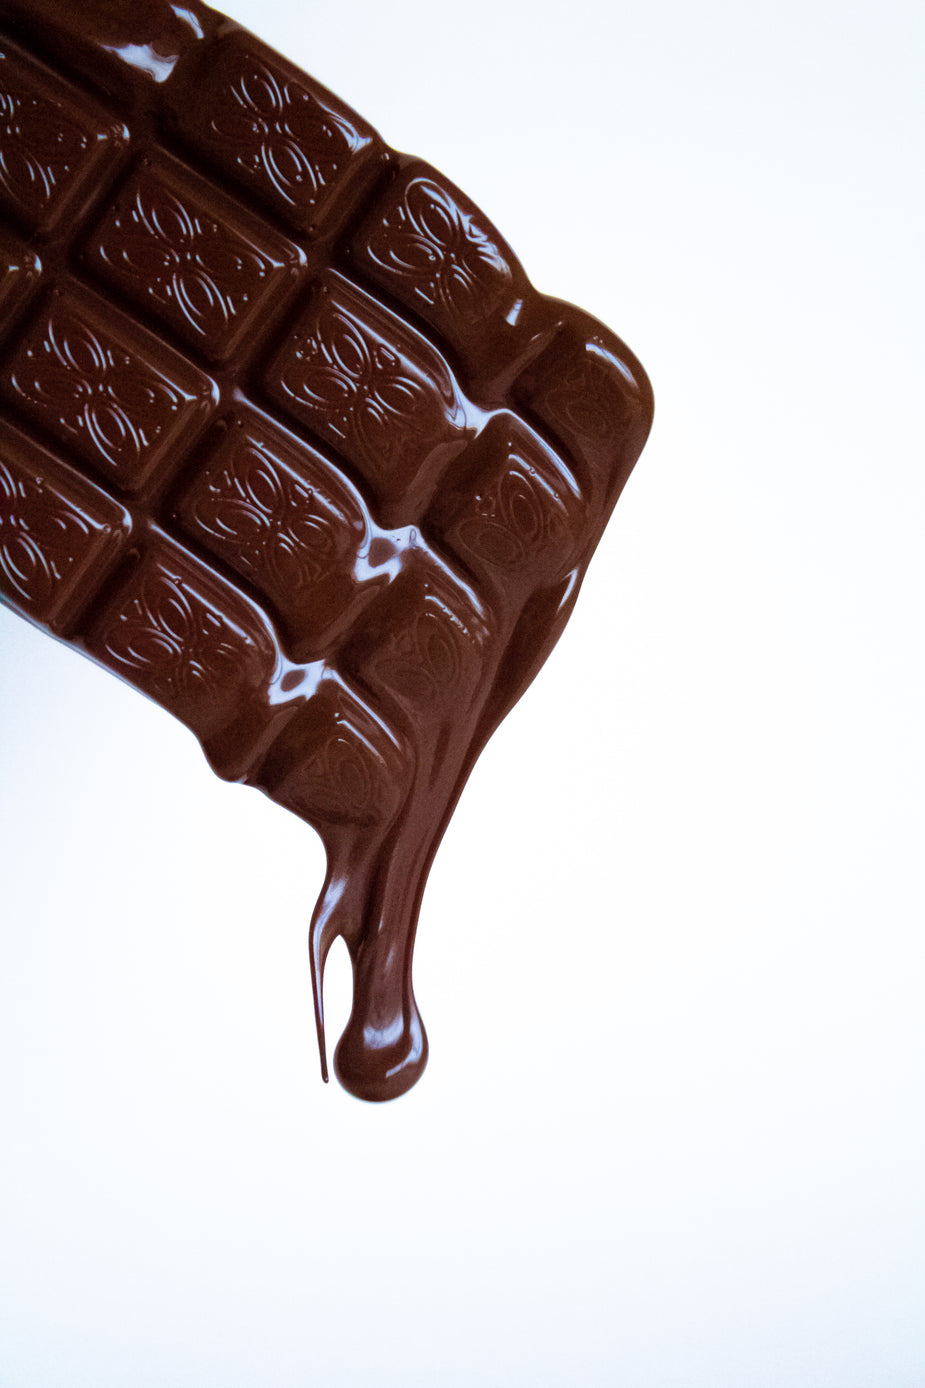 melted chocolate bar